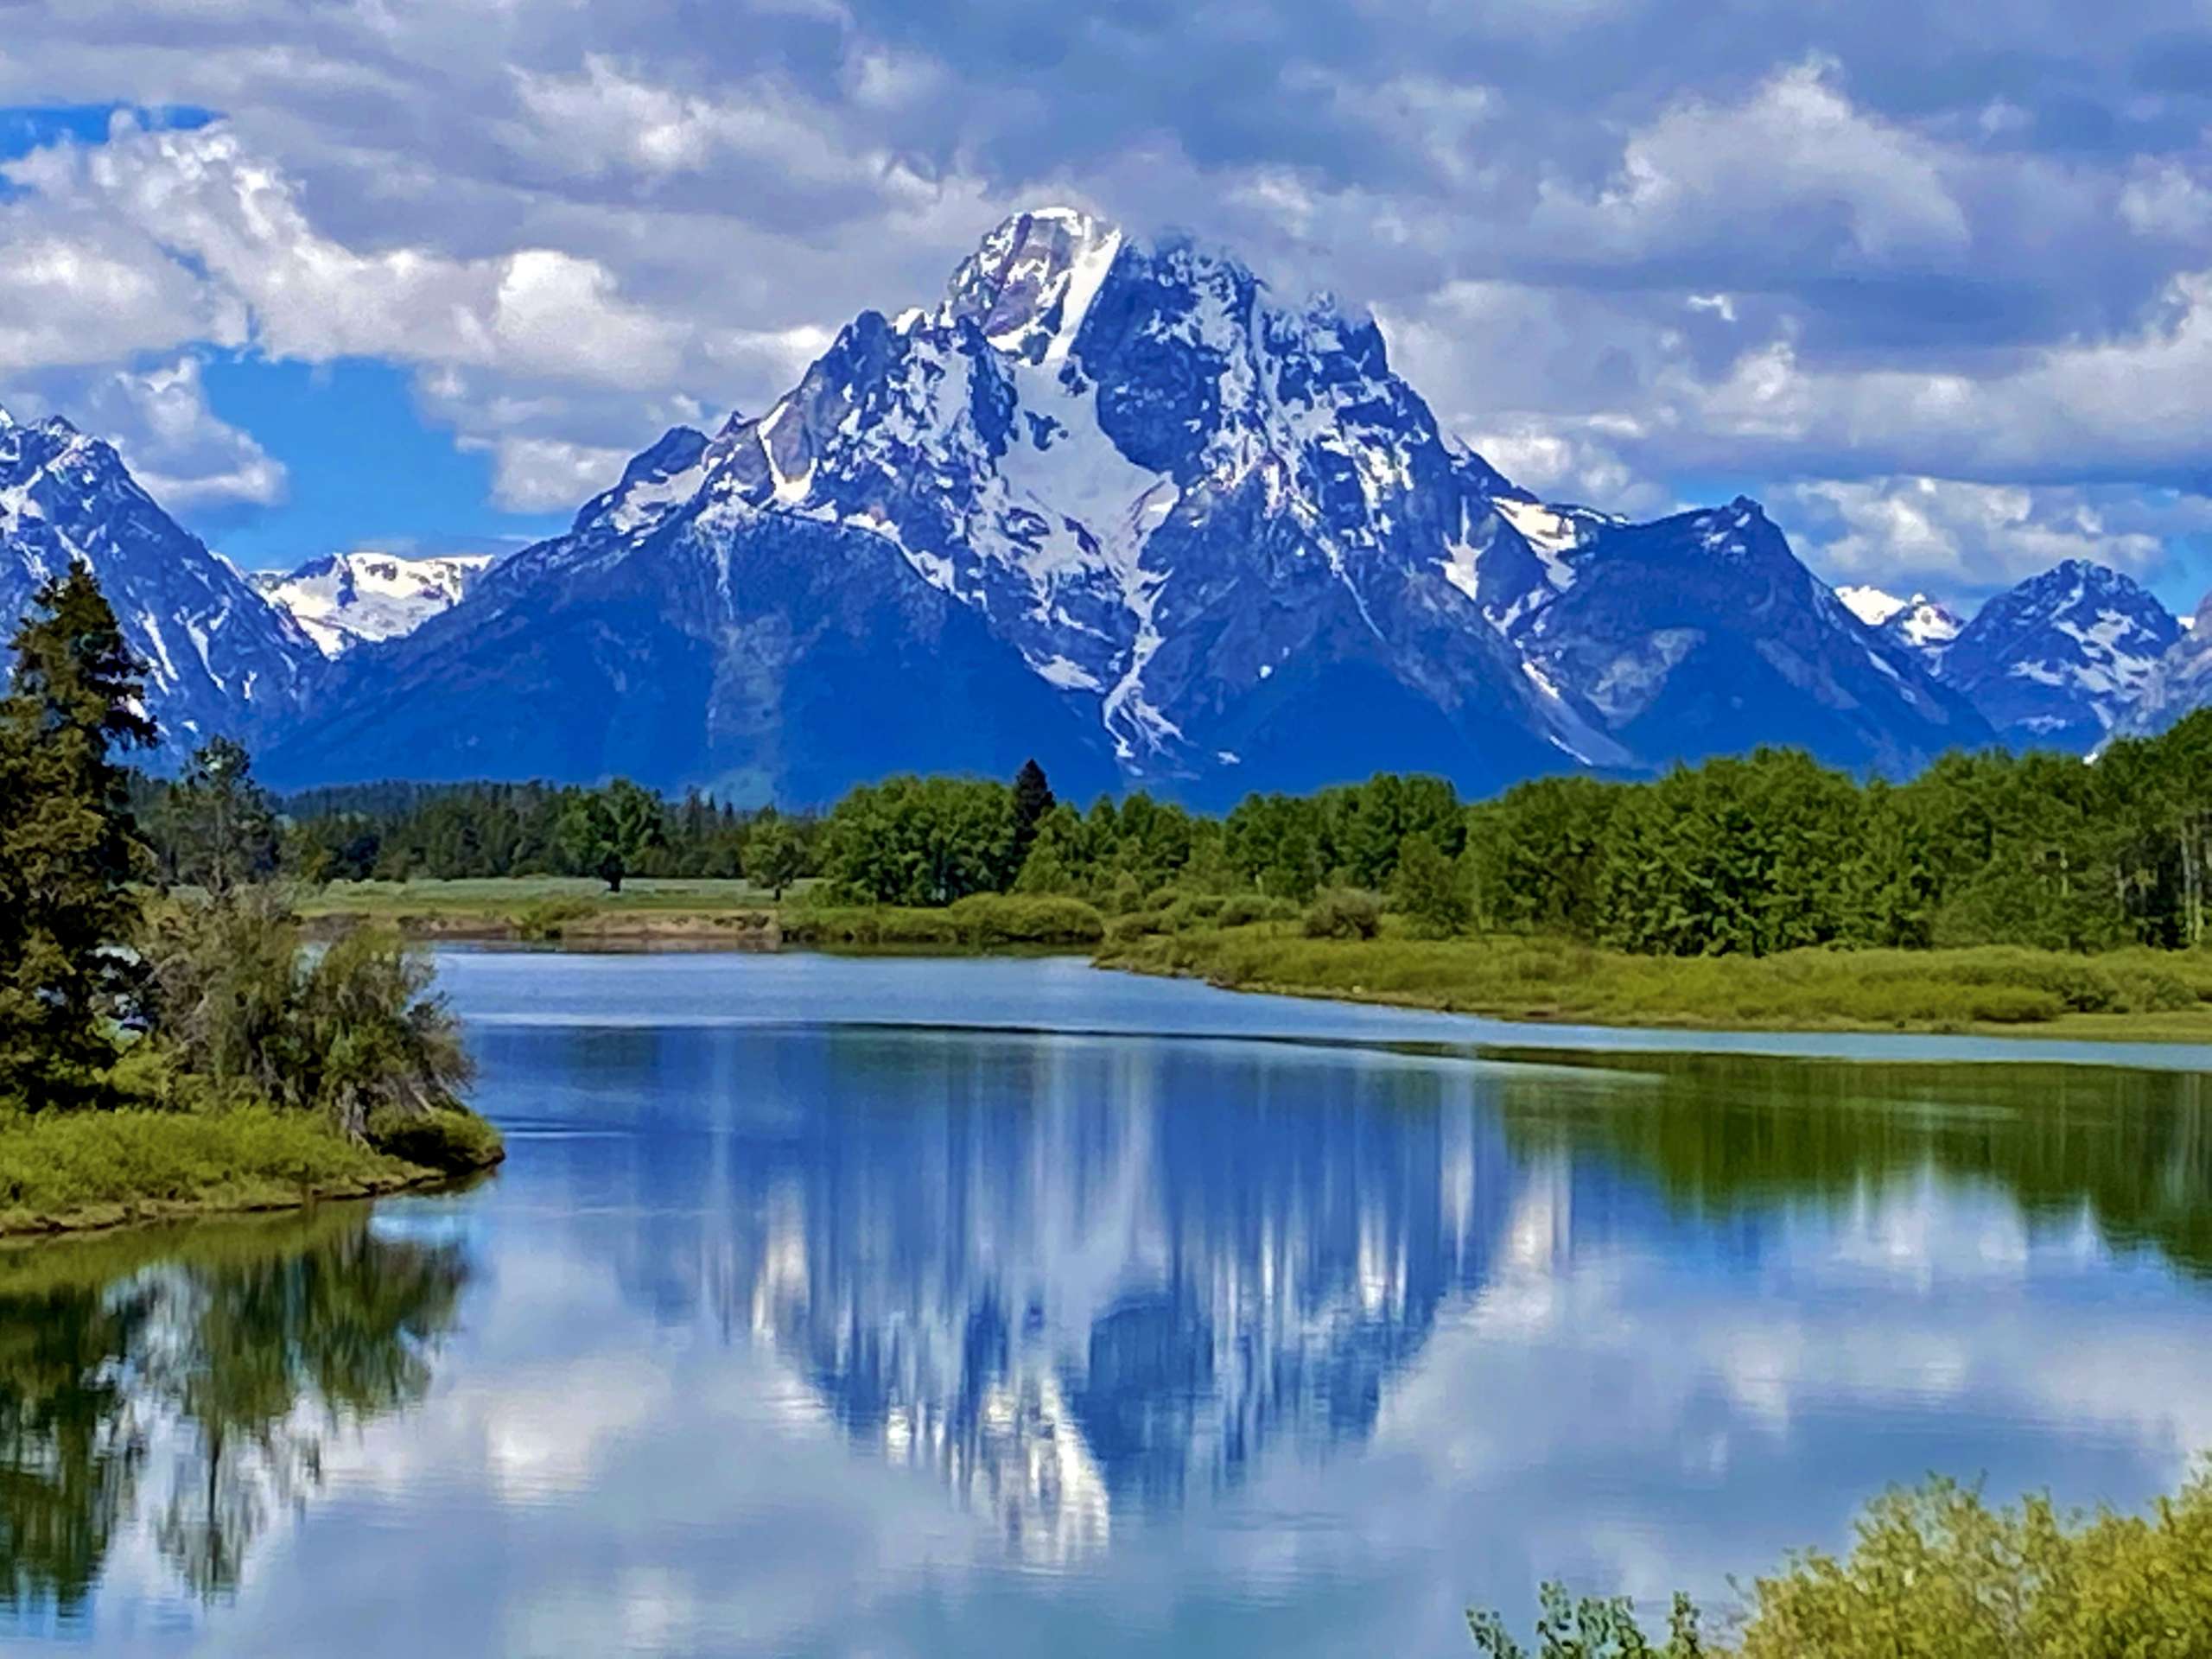 How to Spend 2 Days in Grand Teton National Park